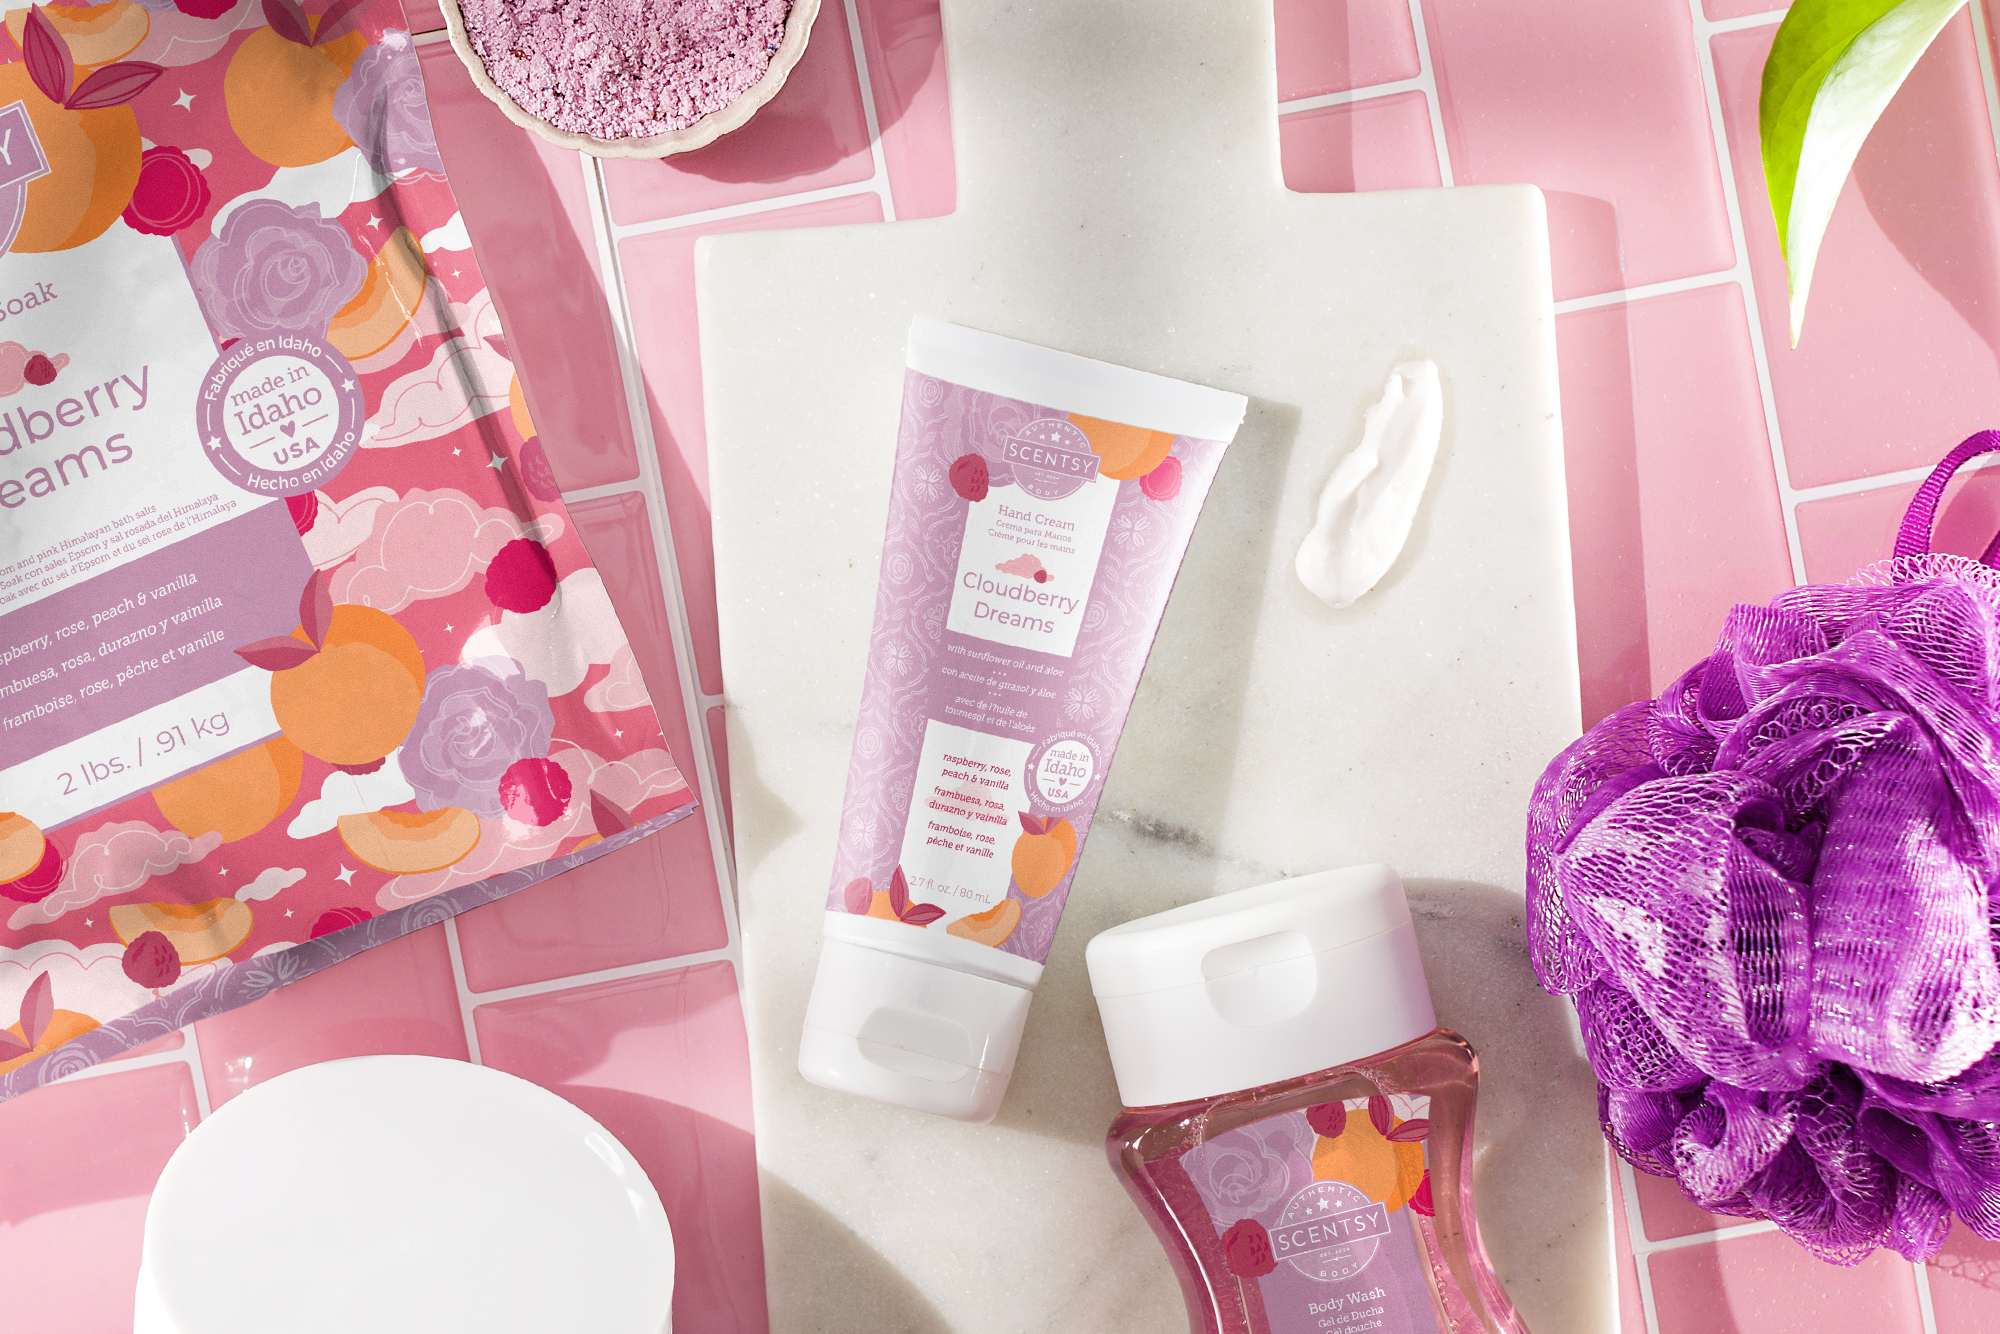 Indulge in a little self-care with Scentsy Hand Cream and Body Cream